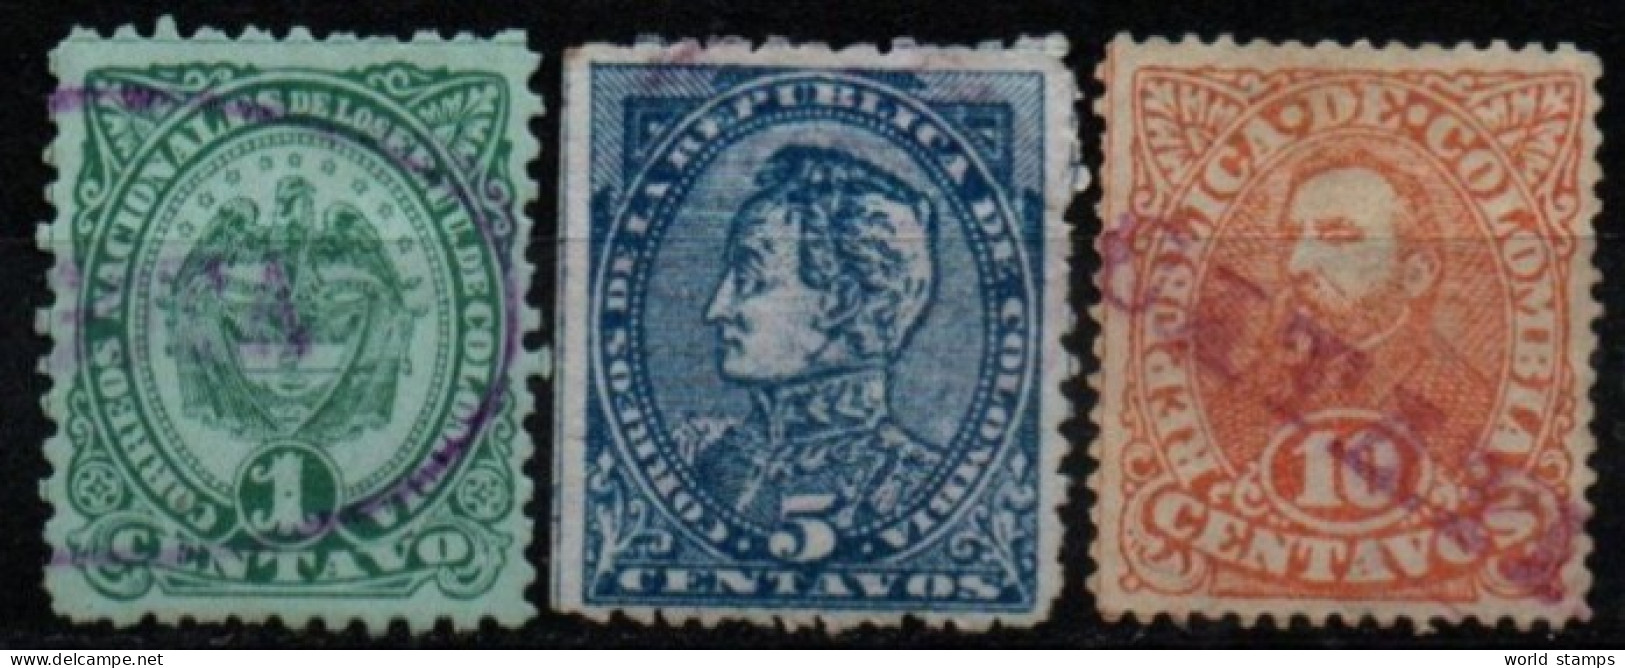 COLOMBIE 1886 O - Colombia